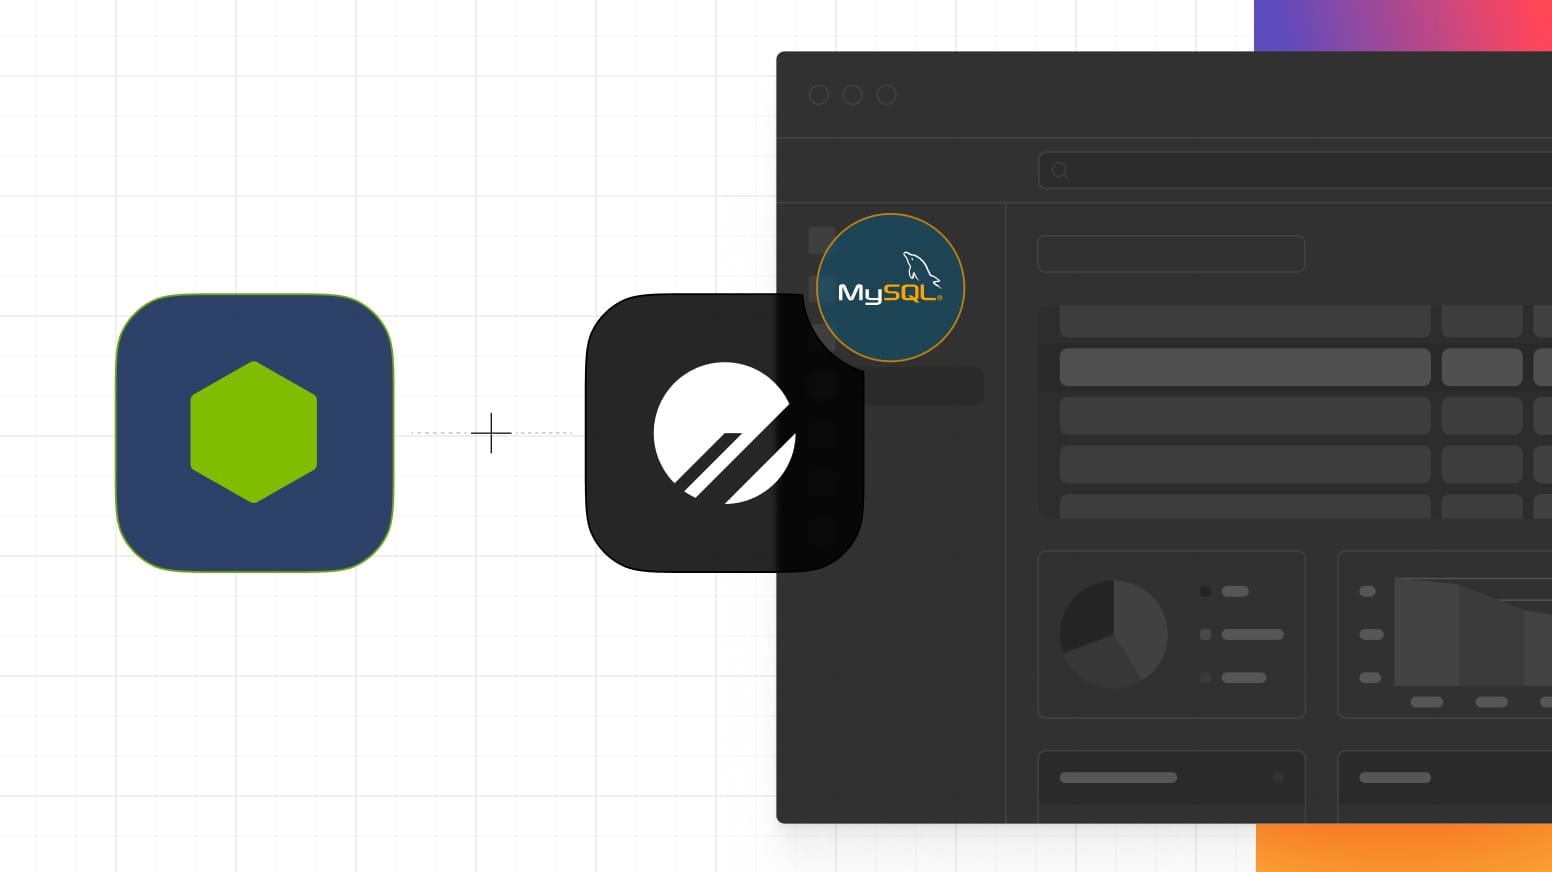 Build a contacts app with Node, Express, and MySQL